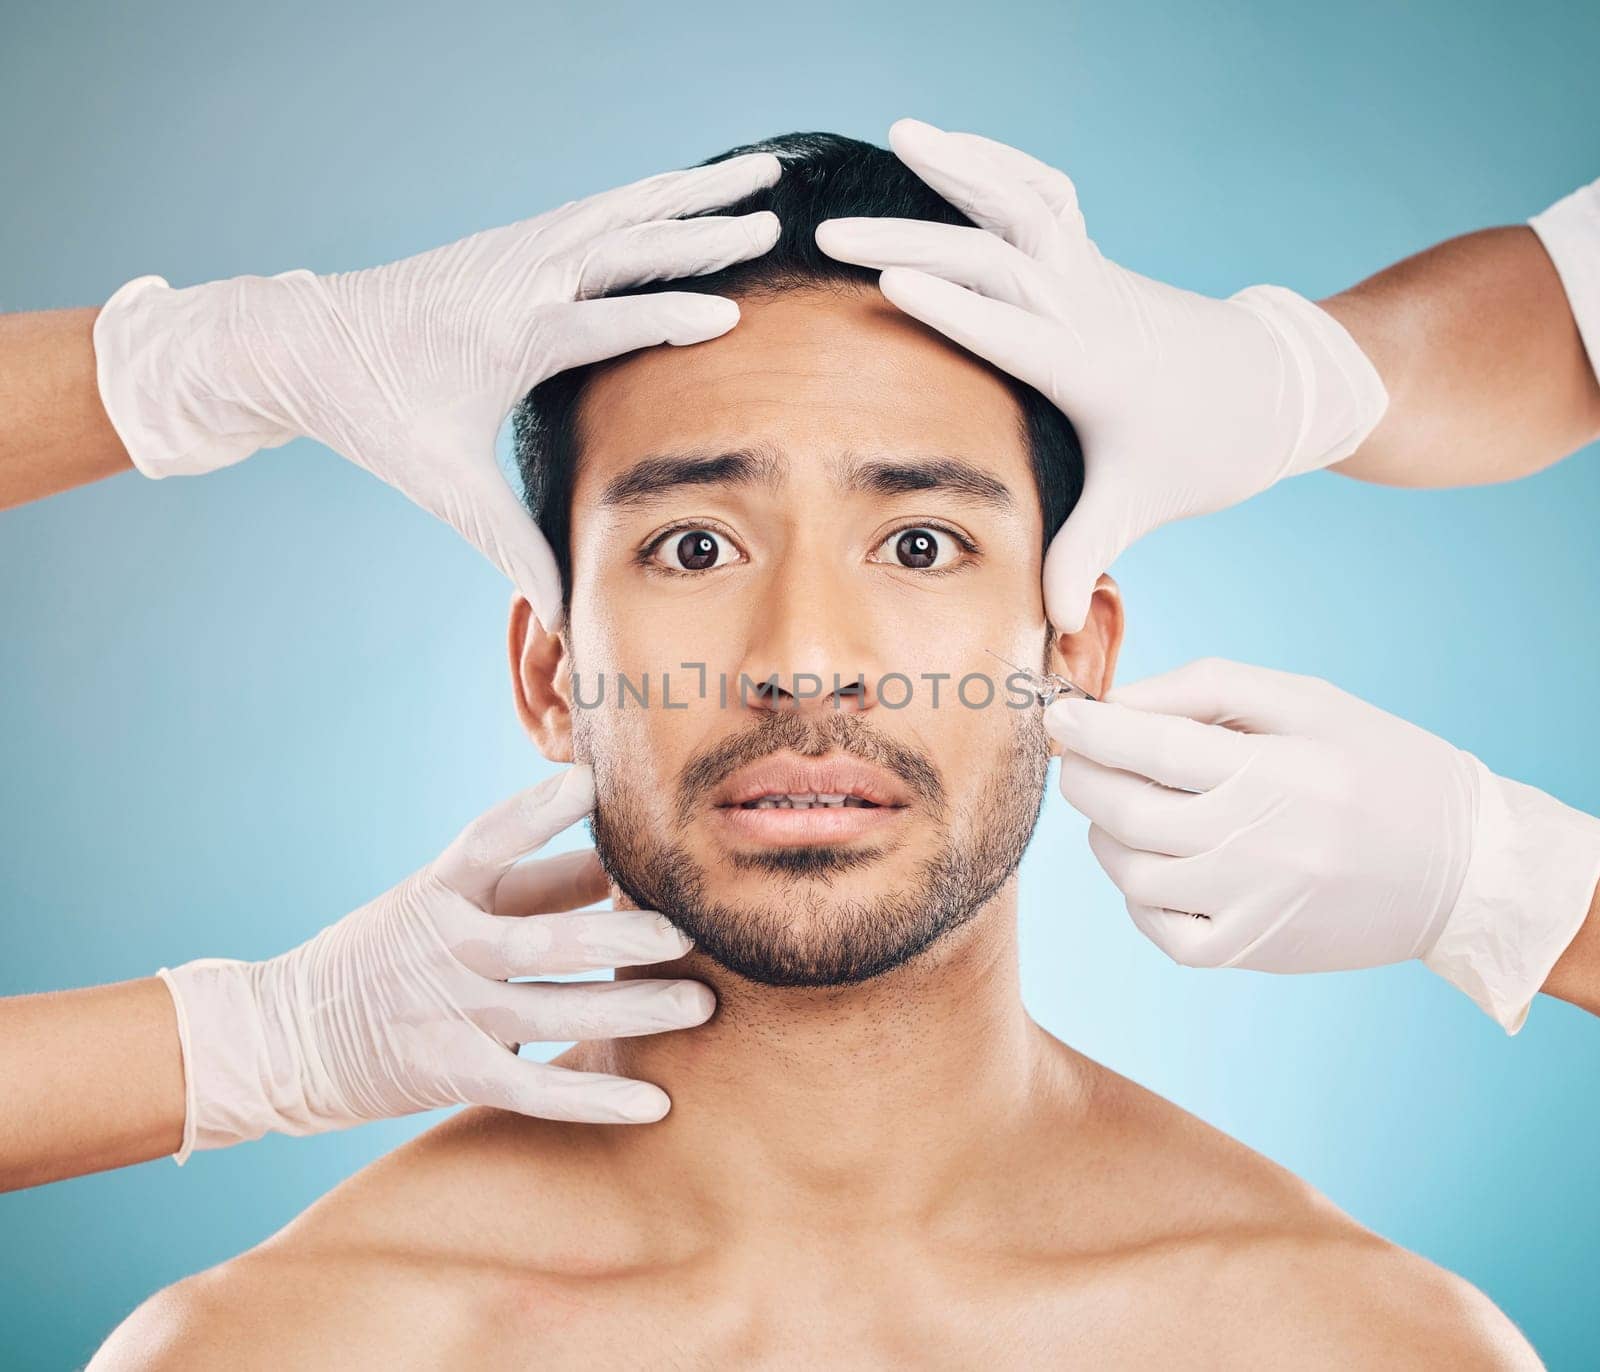 Portrait, hands and plastic surgery with a nervous man in studio on a blue background for beauty enhancement. Face, botox and change with a young male patient looking worried in a clinic for skincare.